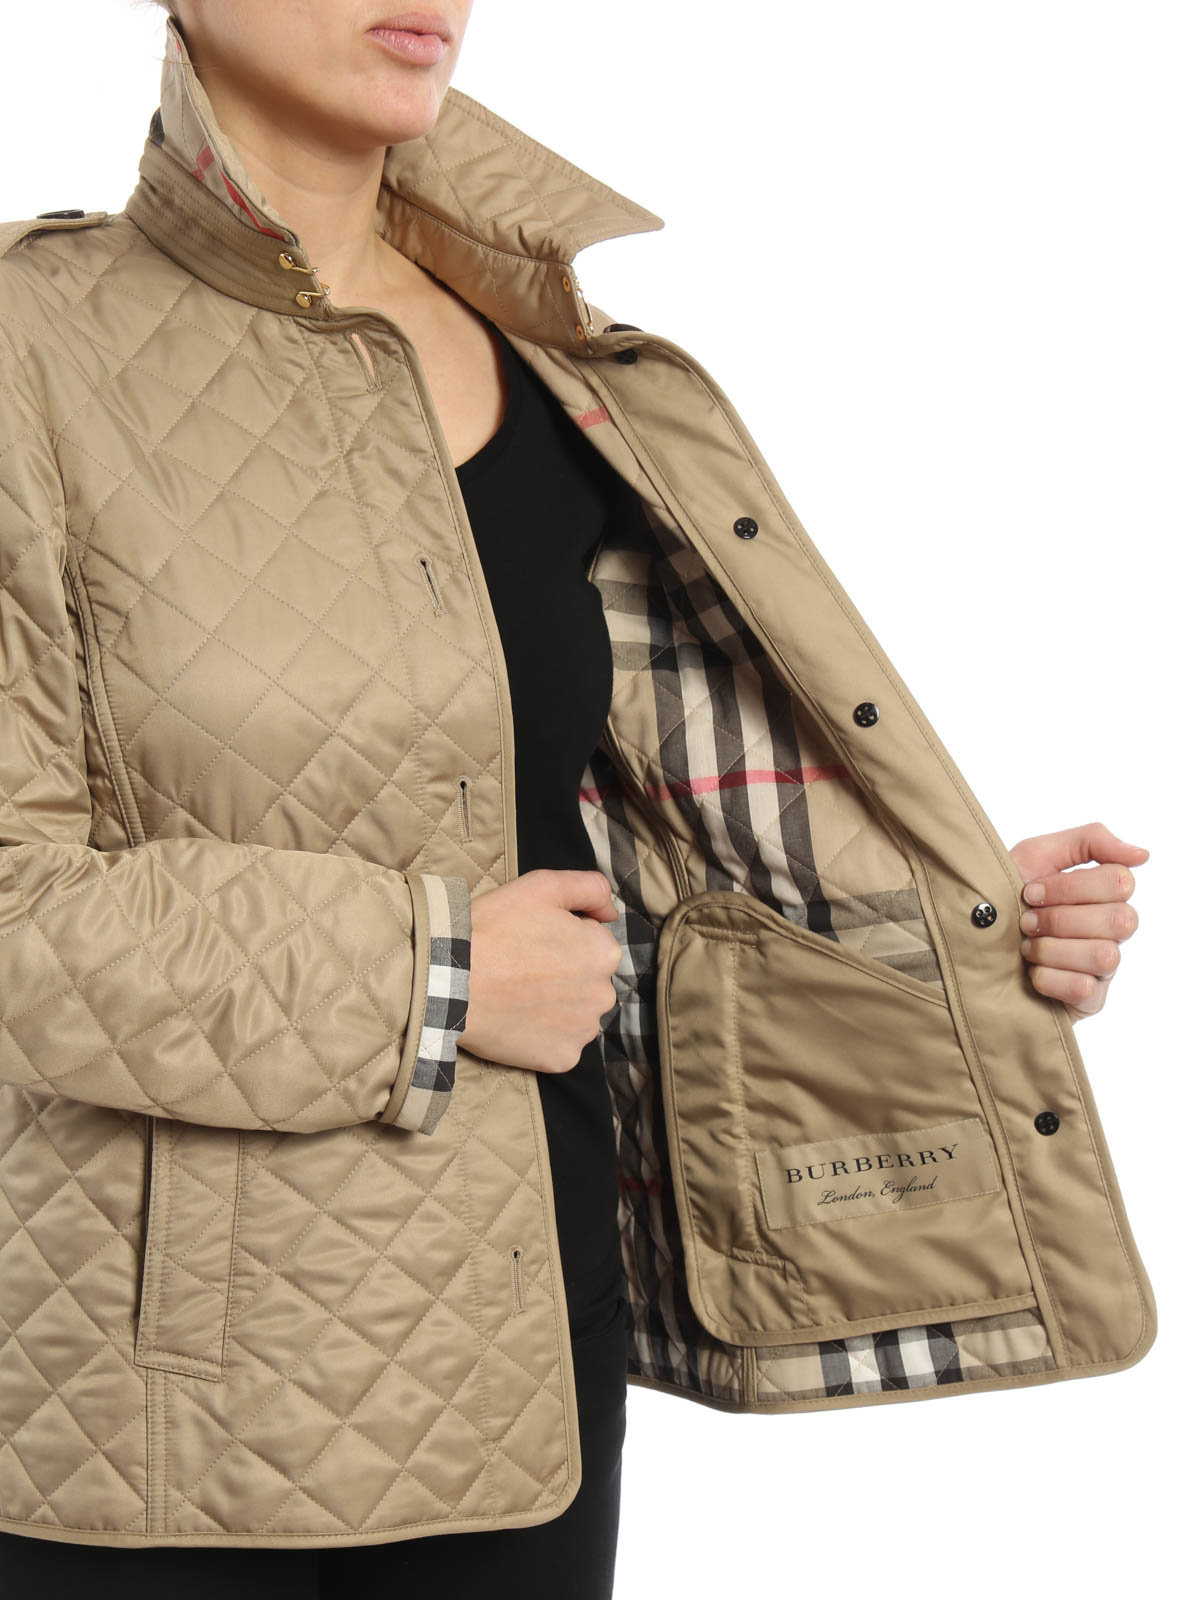 Women's Burberry Quilted Jacket Sale 